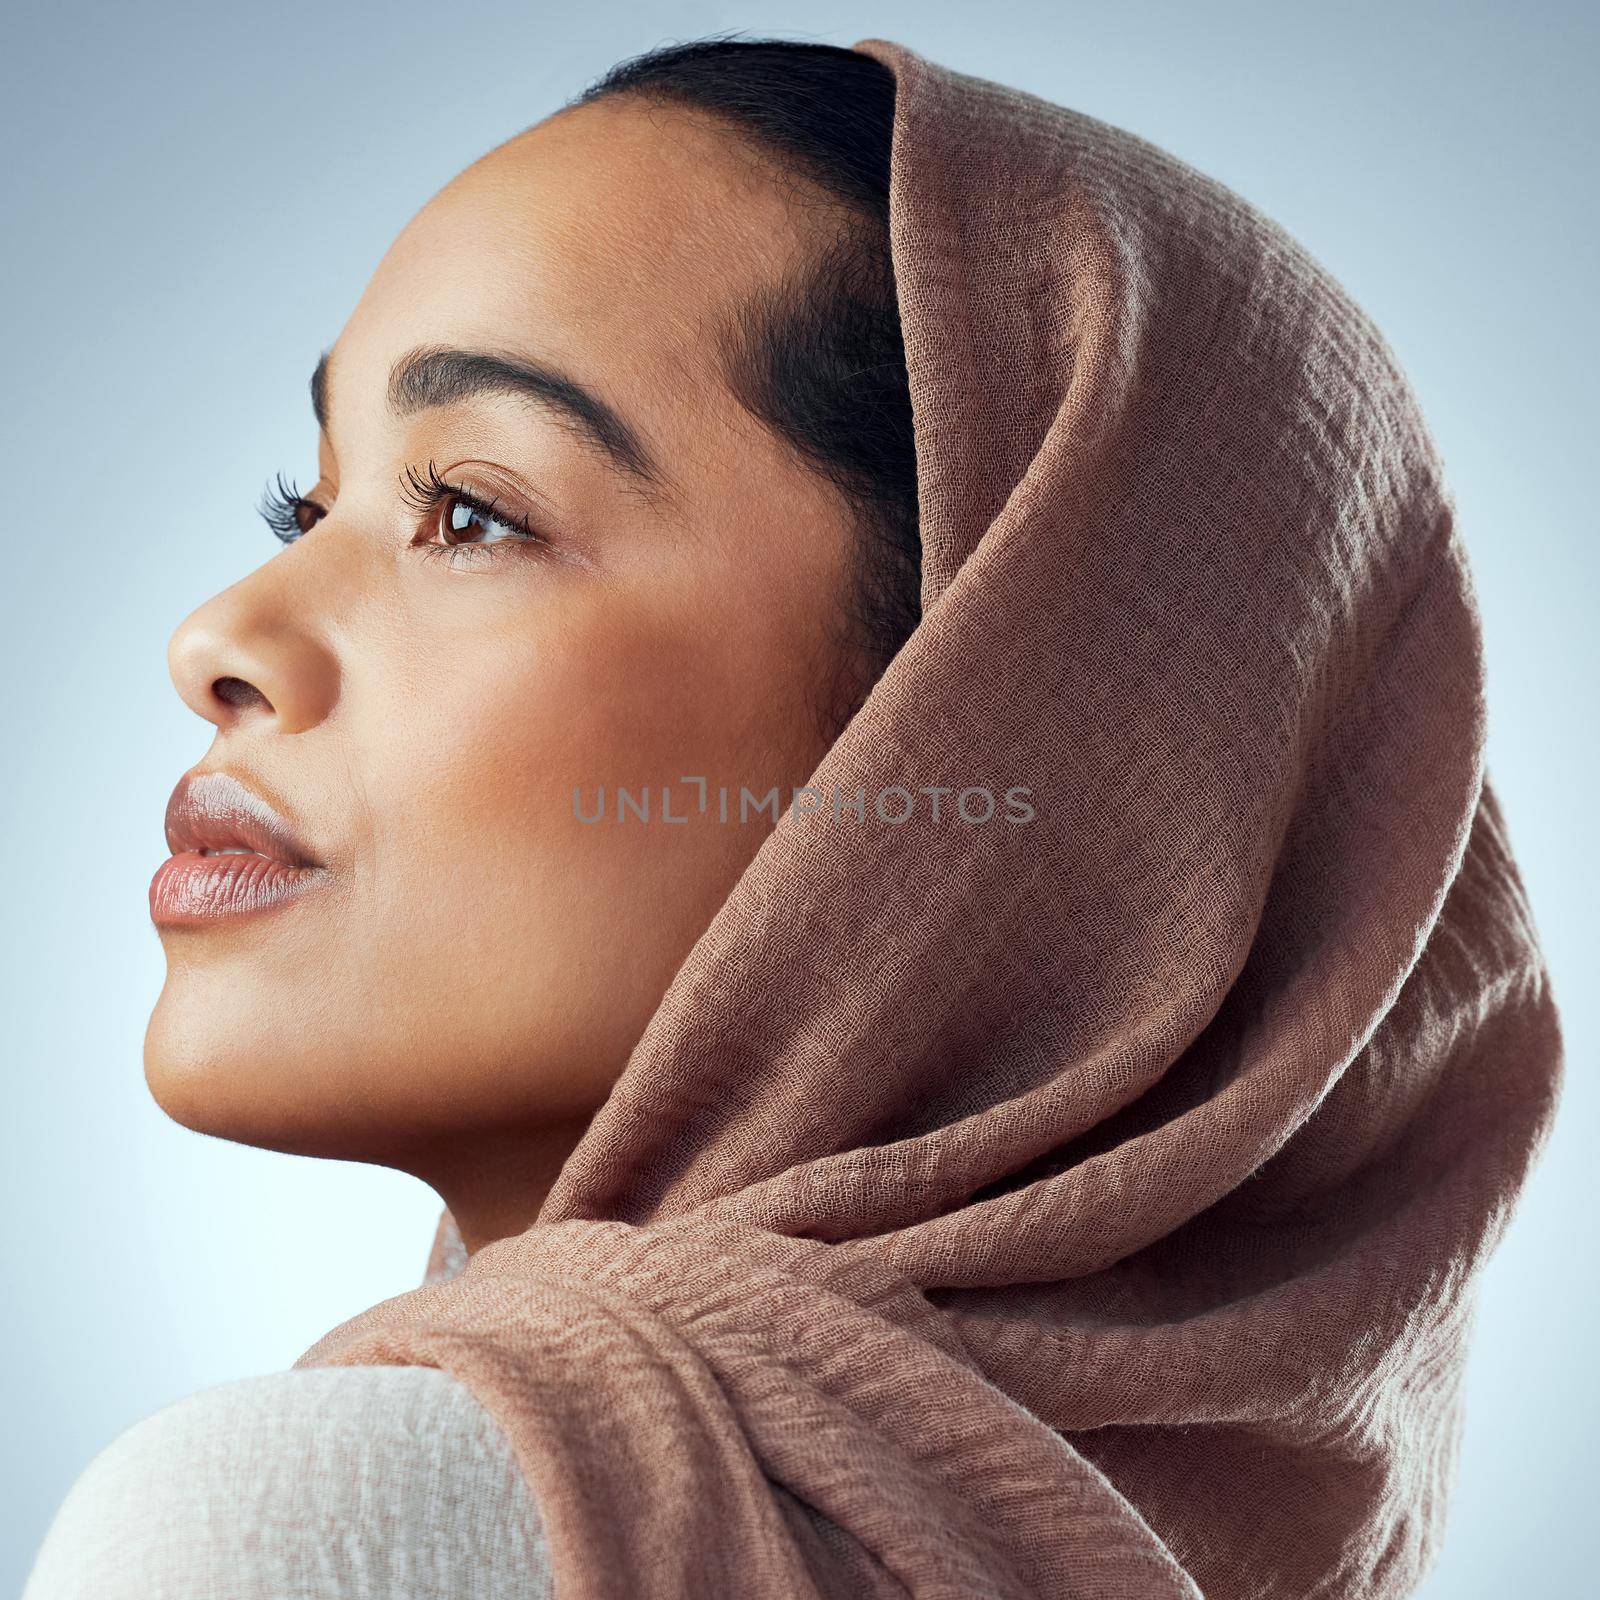 She was beautiful, for the way she thought. Studio shot of a beautiful young woman wearing a headscarf against a grey background. by YuriArcurs